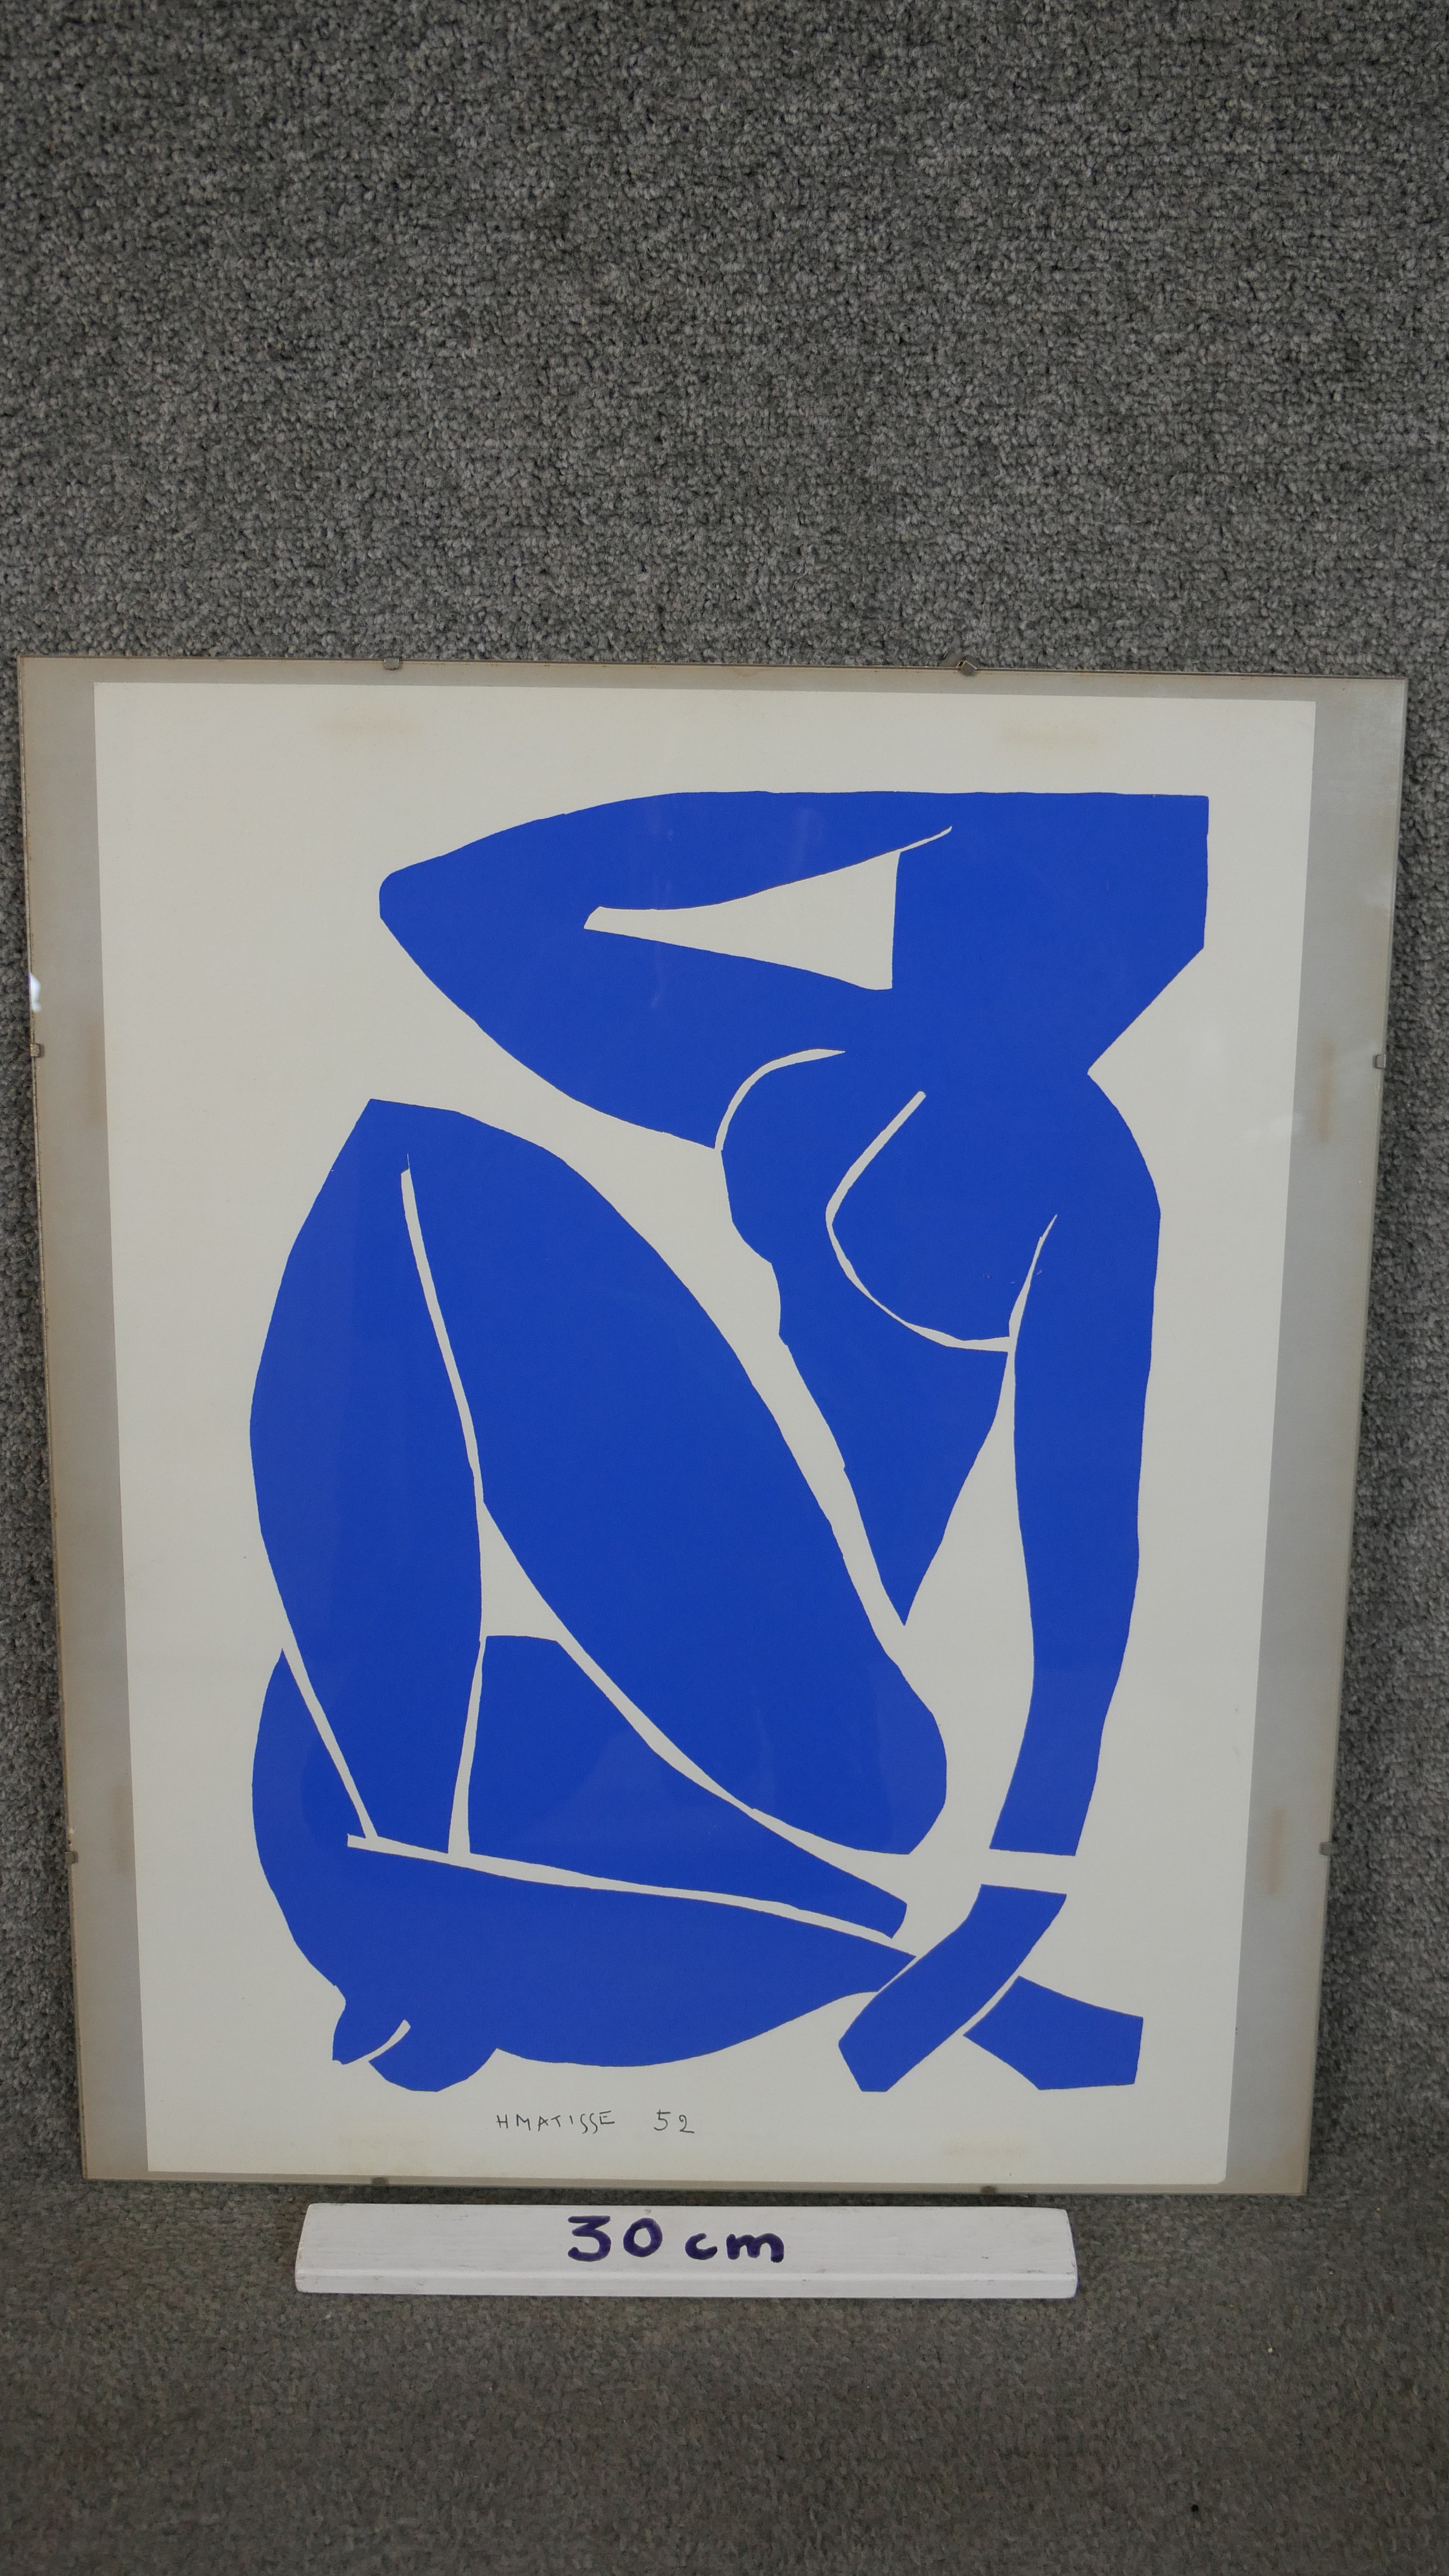 Henri Matisse (1869–1954), Nu Bleu XII, 1954, lithograph print, signed and dated in plate. H.61 W. - Image 3 of 4